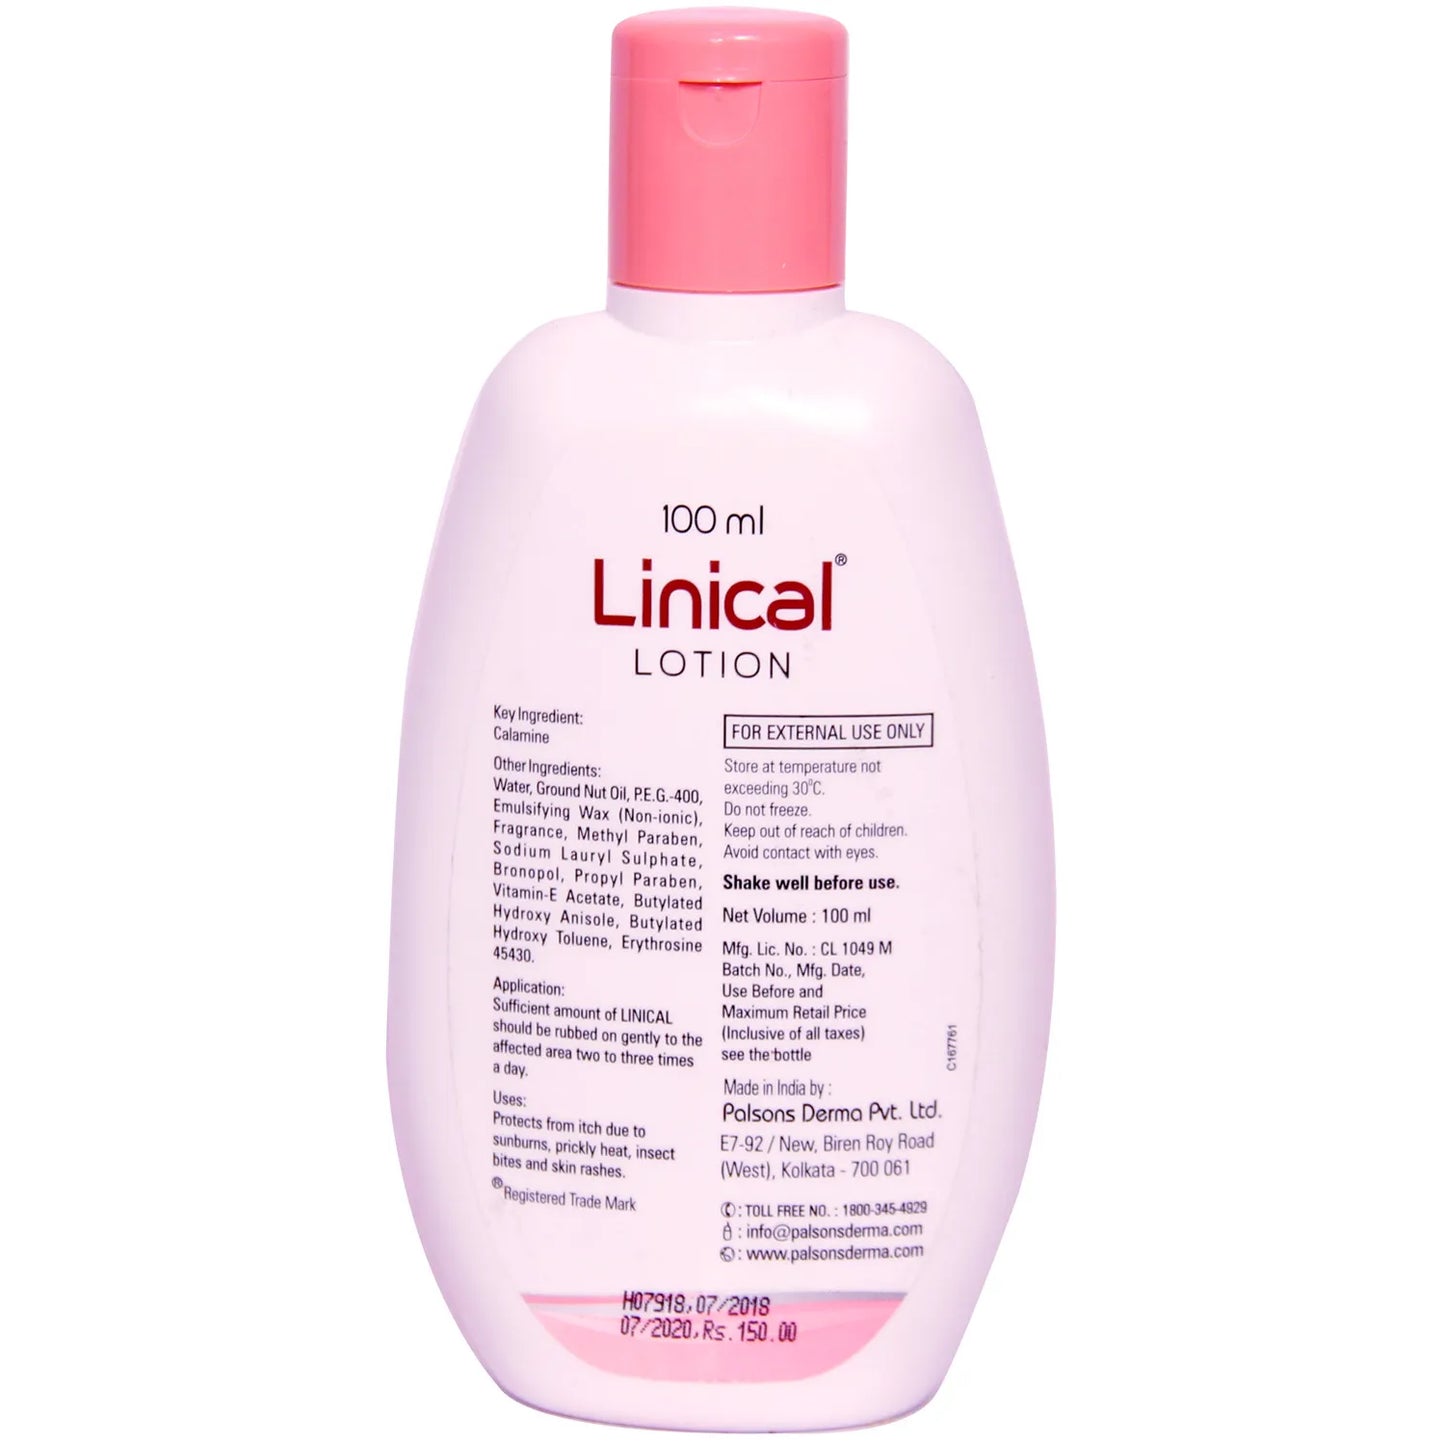 Linical Lotion, 100ml